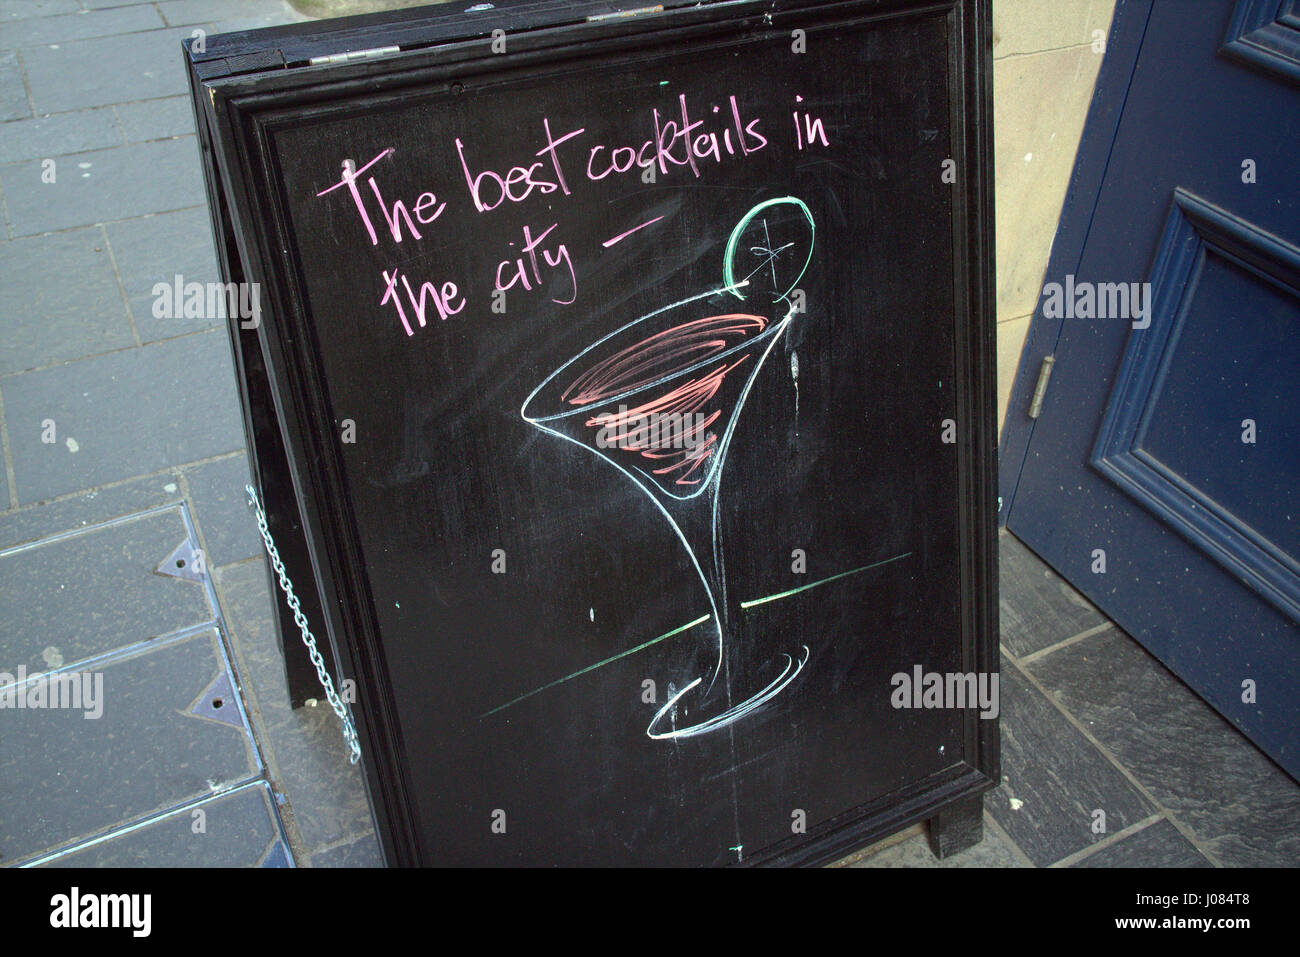 best cocktails in the city alcohol pub restaurant advertising sign chalk blackboard Stock Photo